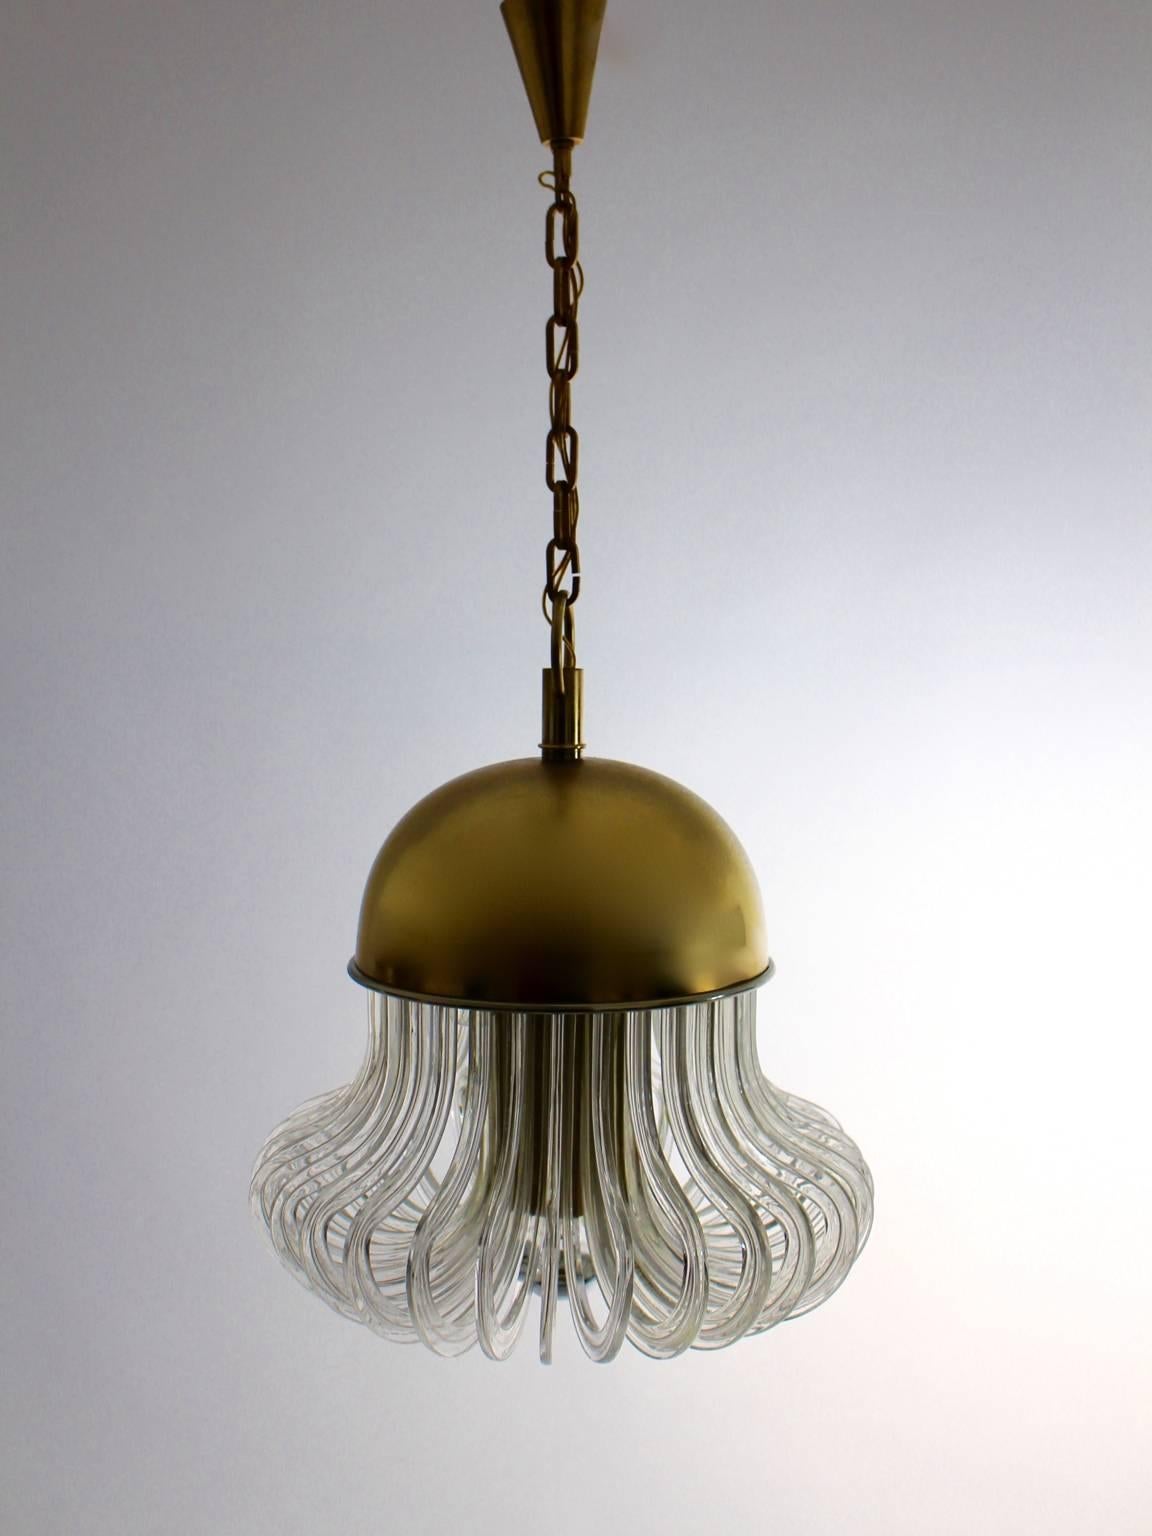 A mid century modern crystal glass vintage chandelier / pendant Mod. Quazar,  which features a brass dome and thirty pieces of curved clear crystal glass sticks. The impressive and beautiful chandelier with a reduced shape was designed by Cari